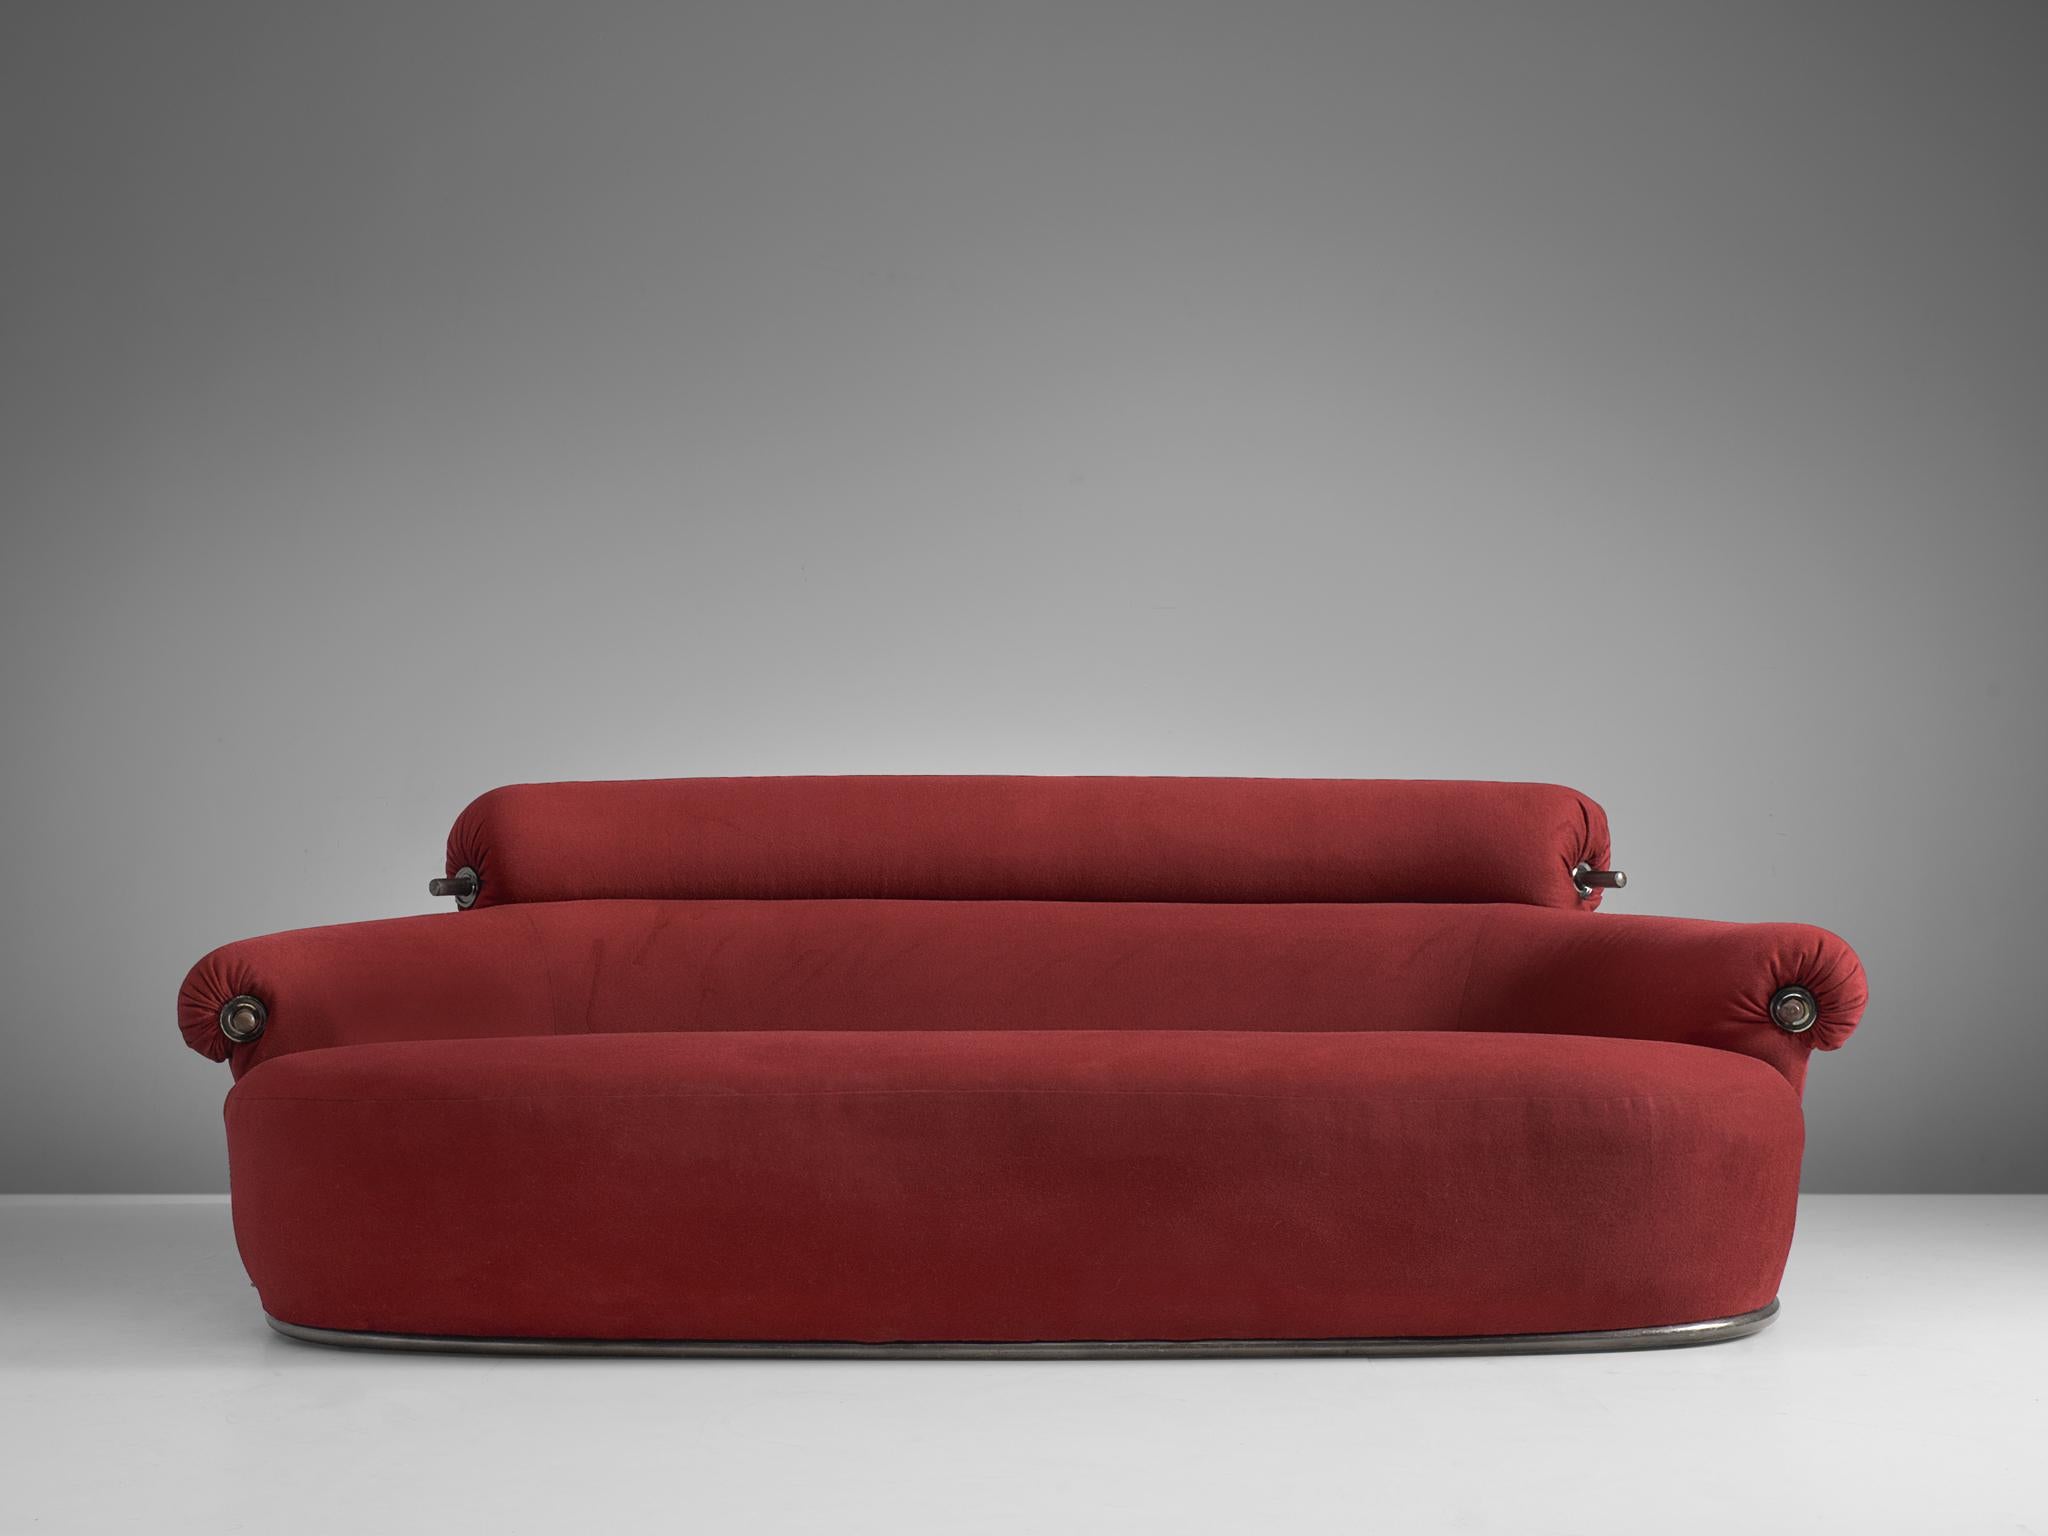 Luigi Caccia Dominioni for Azucena, toro sofa, red fabric, Italy, 1979

This sofa model 'P20B Toro' is produced by Azucena. The sofa is designed by Luigi Caccio Dominioni in Milan. The sofa is nicknamed Toro which is used because of several